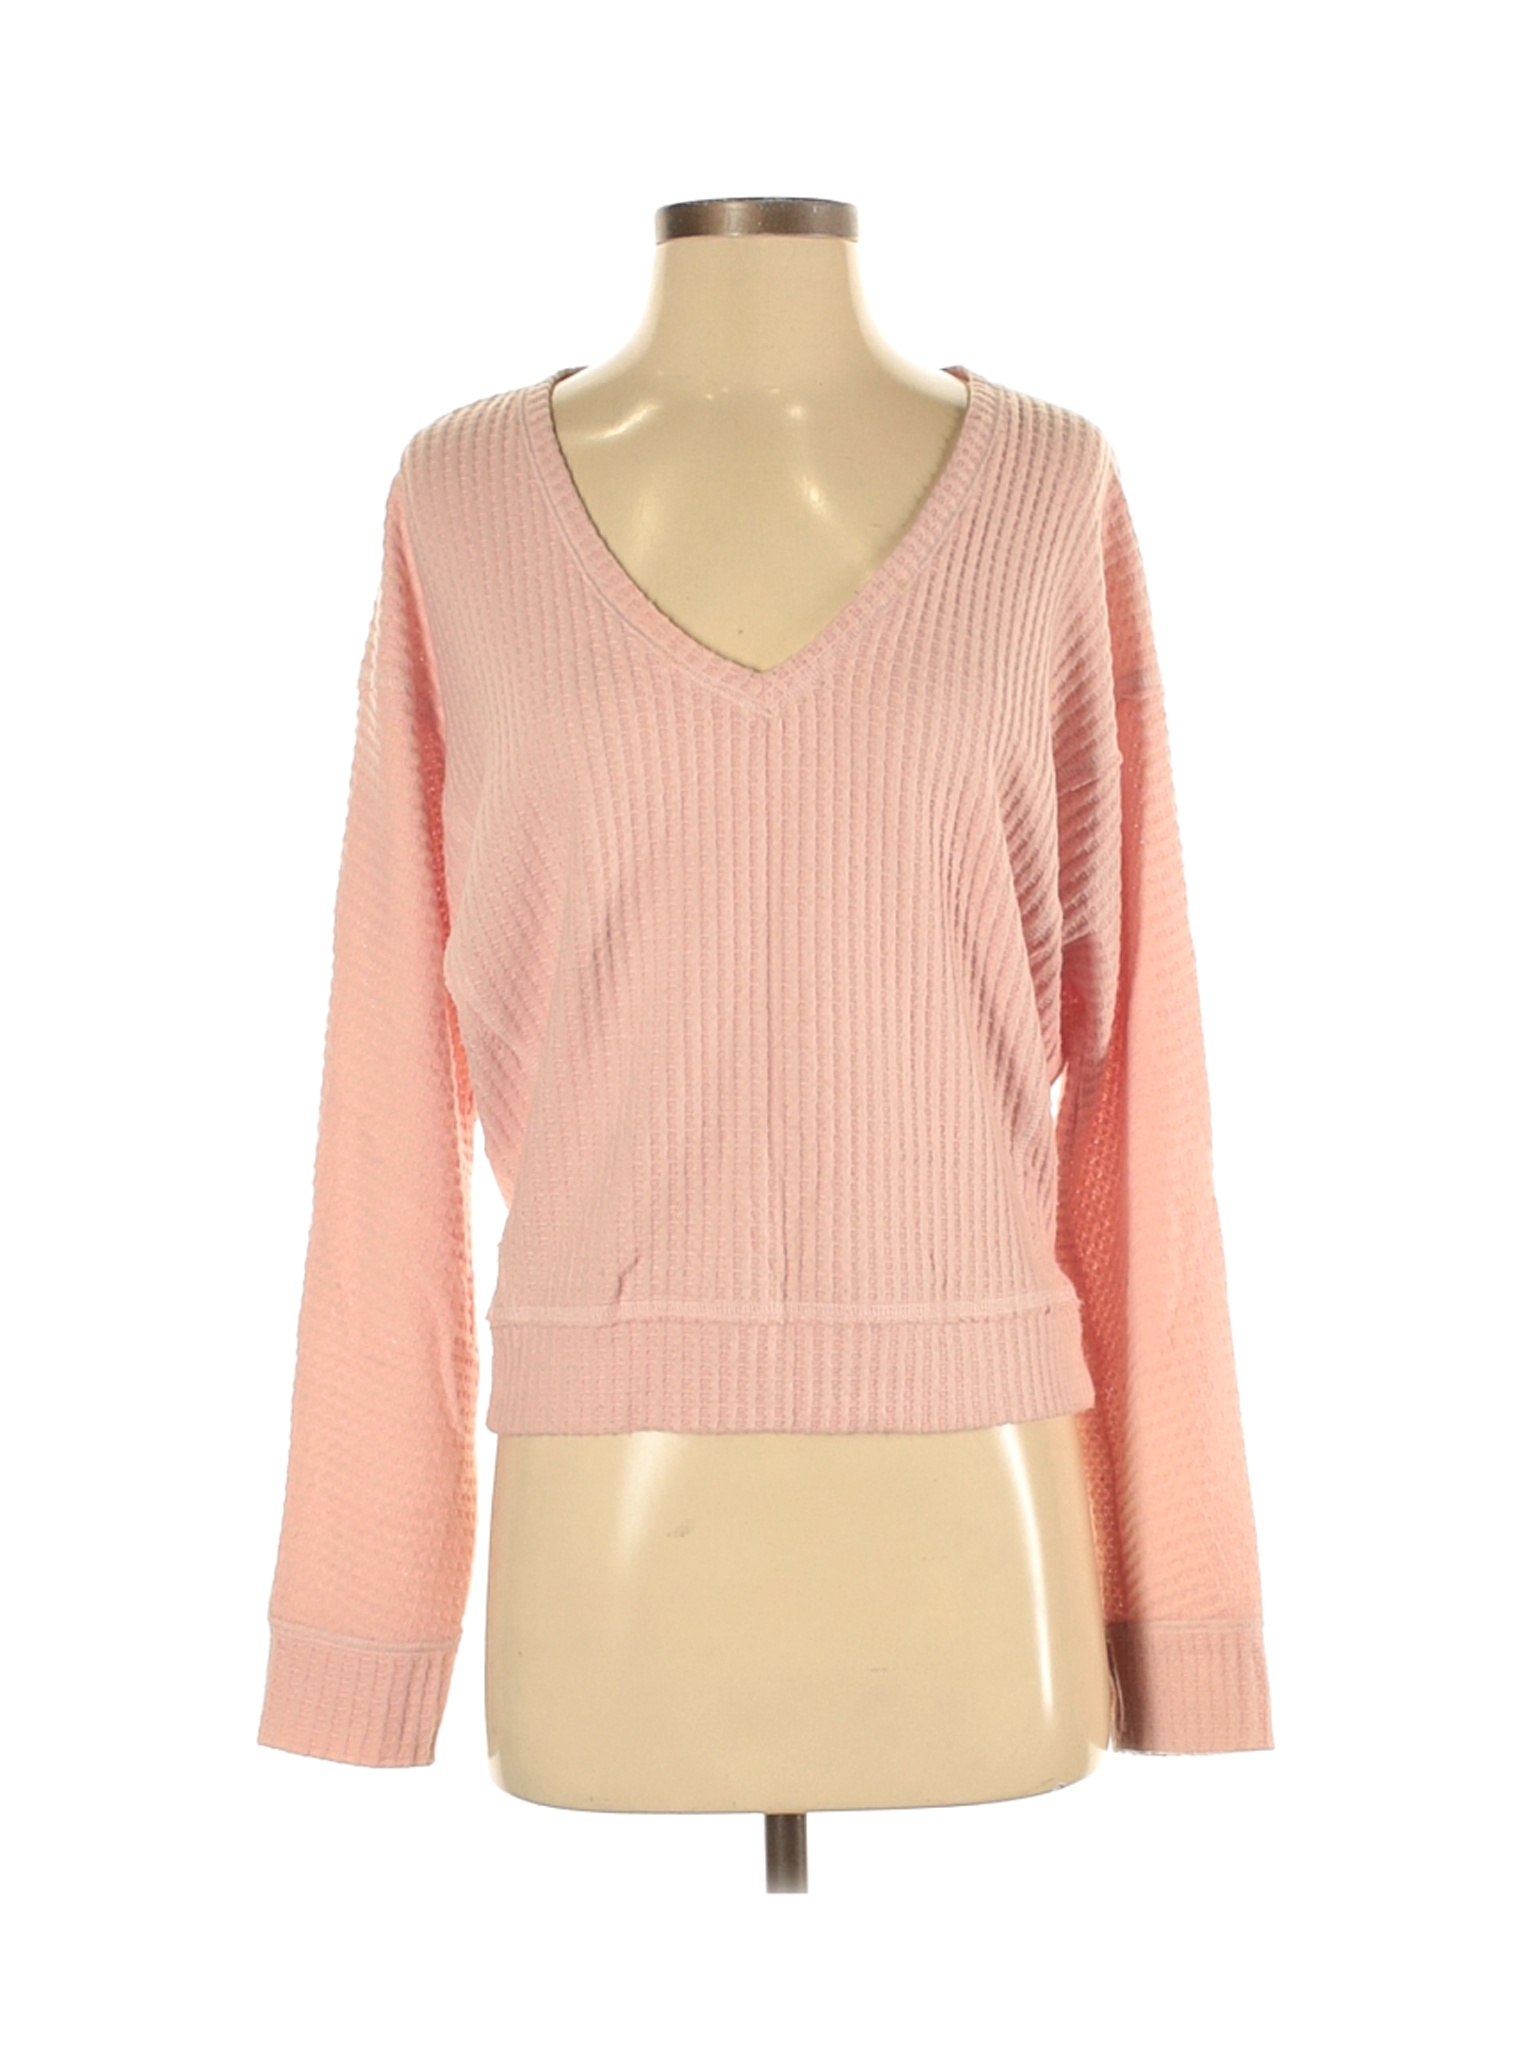 Abercrombie & Fitch Women Pink Pullover Sweater S | eBay